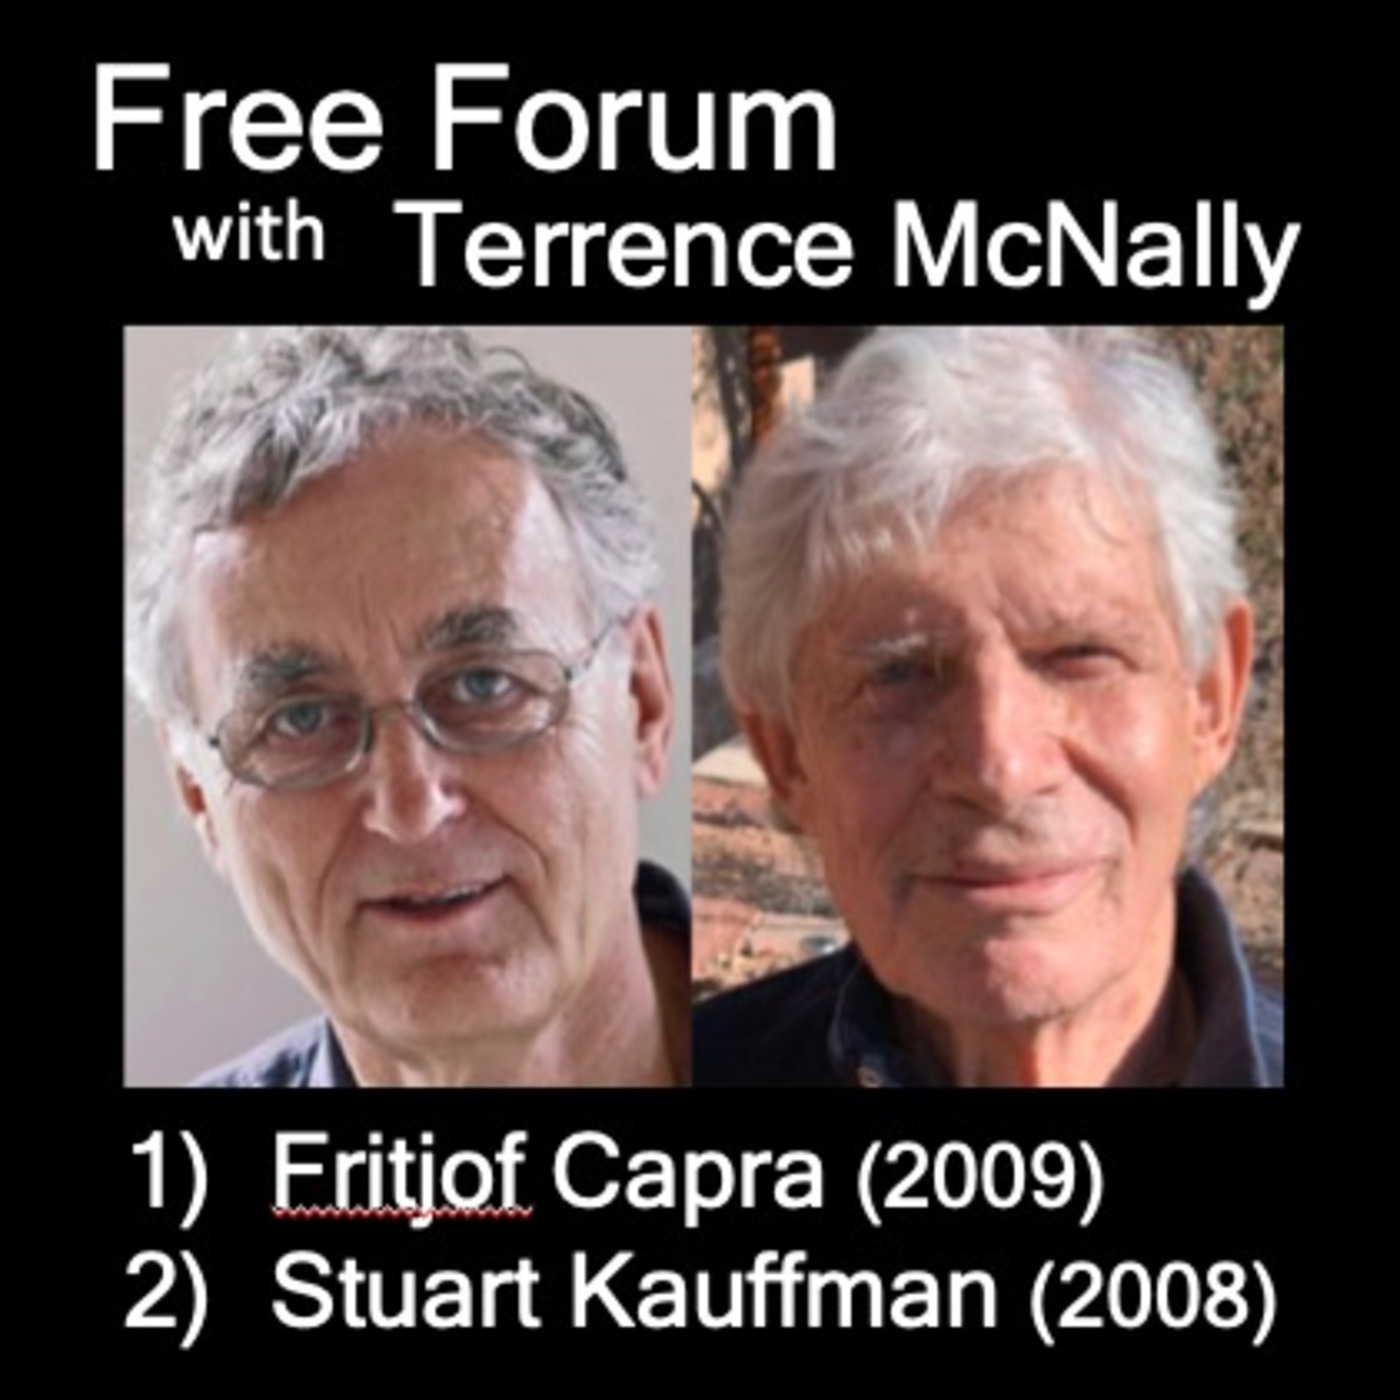 Inspiring ideas for troubling times-1) Fritjof Capra on Systems Thinking, 2) Stuart Kauffman, Reinventing the Sacred